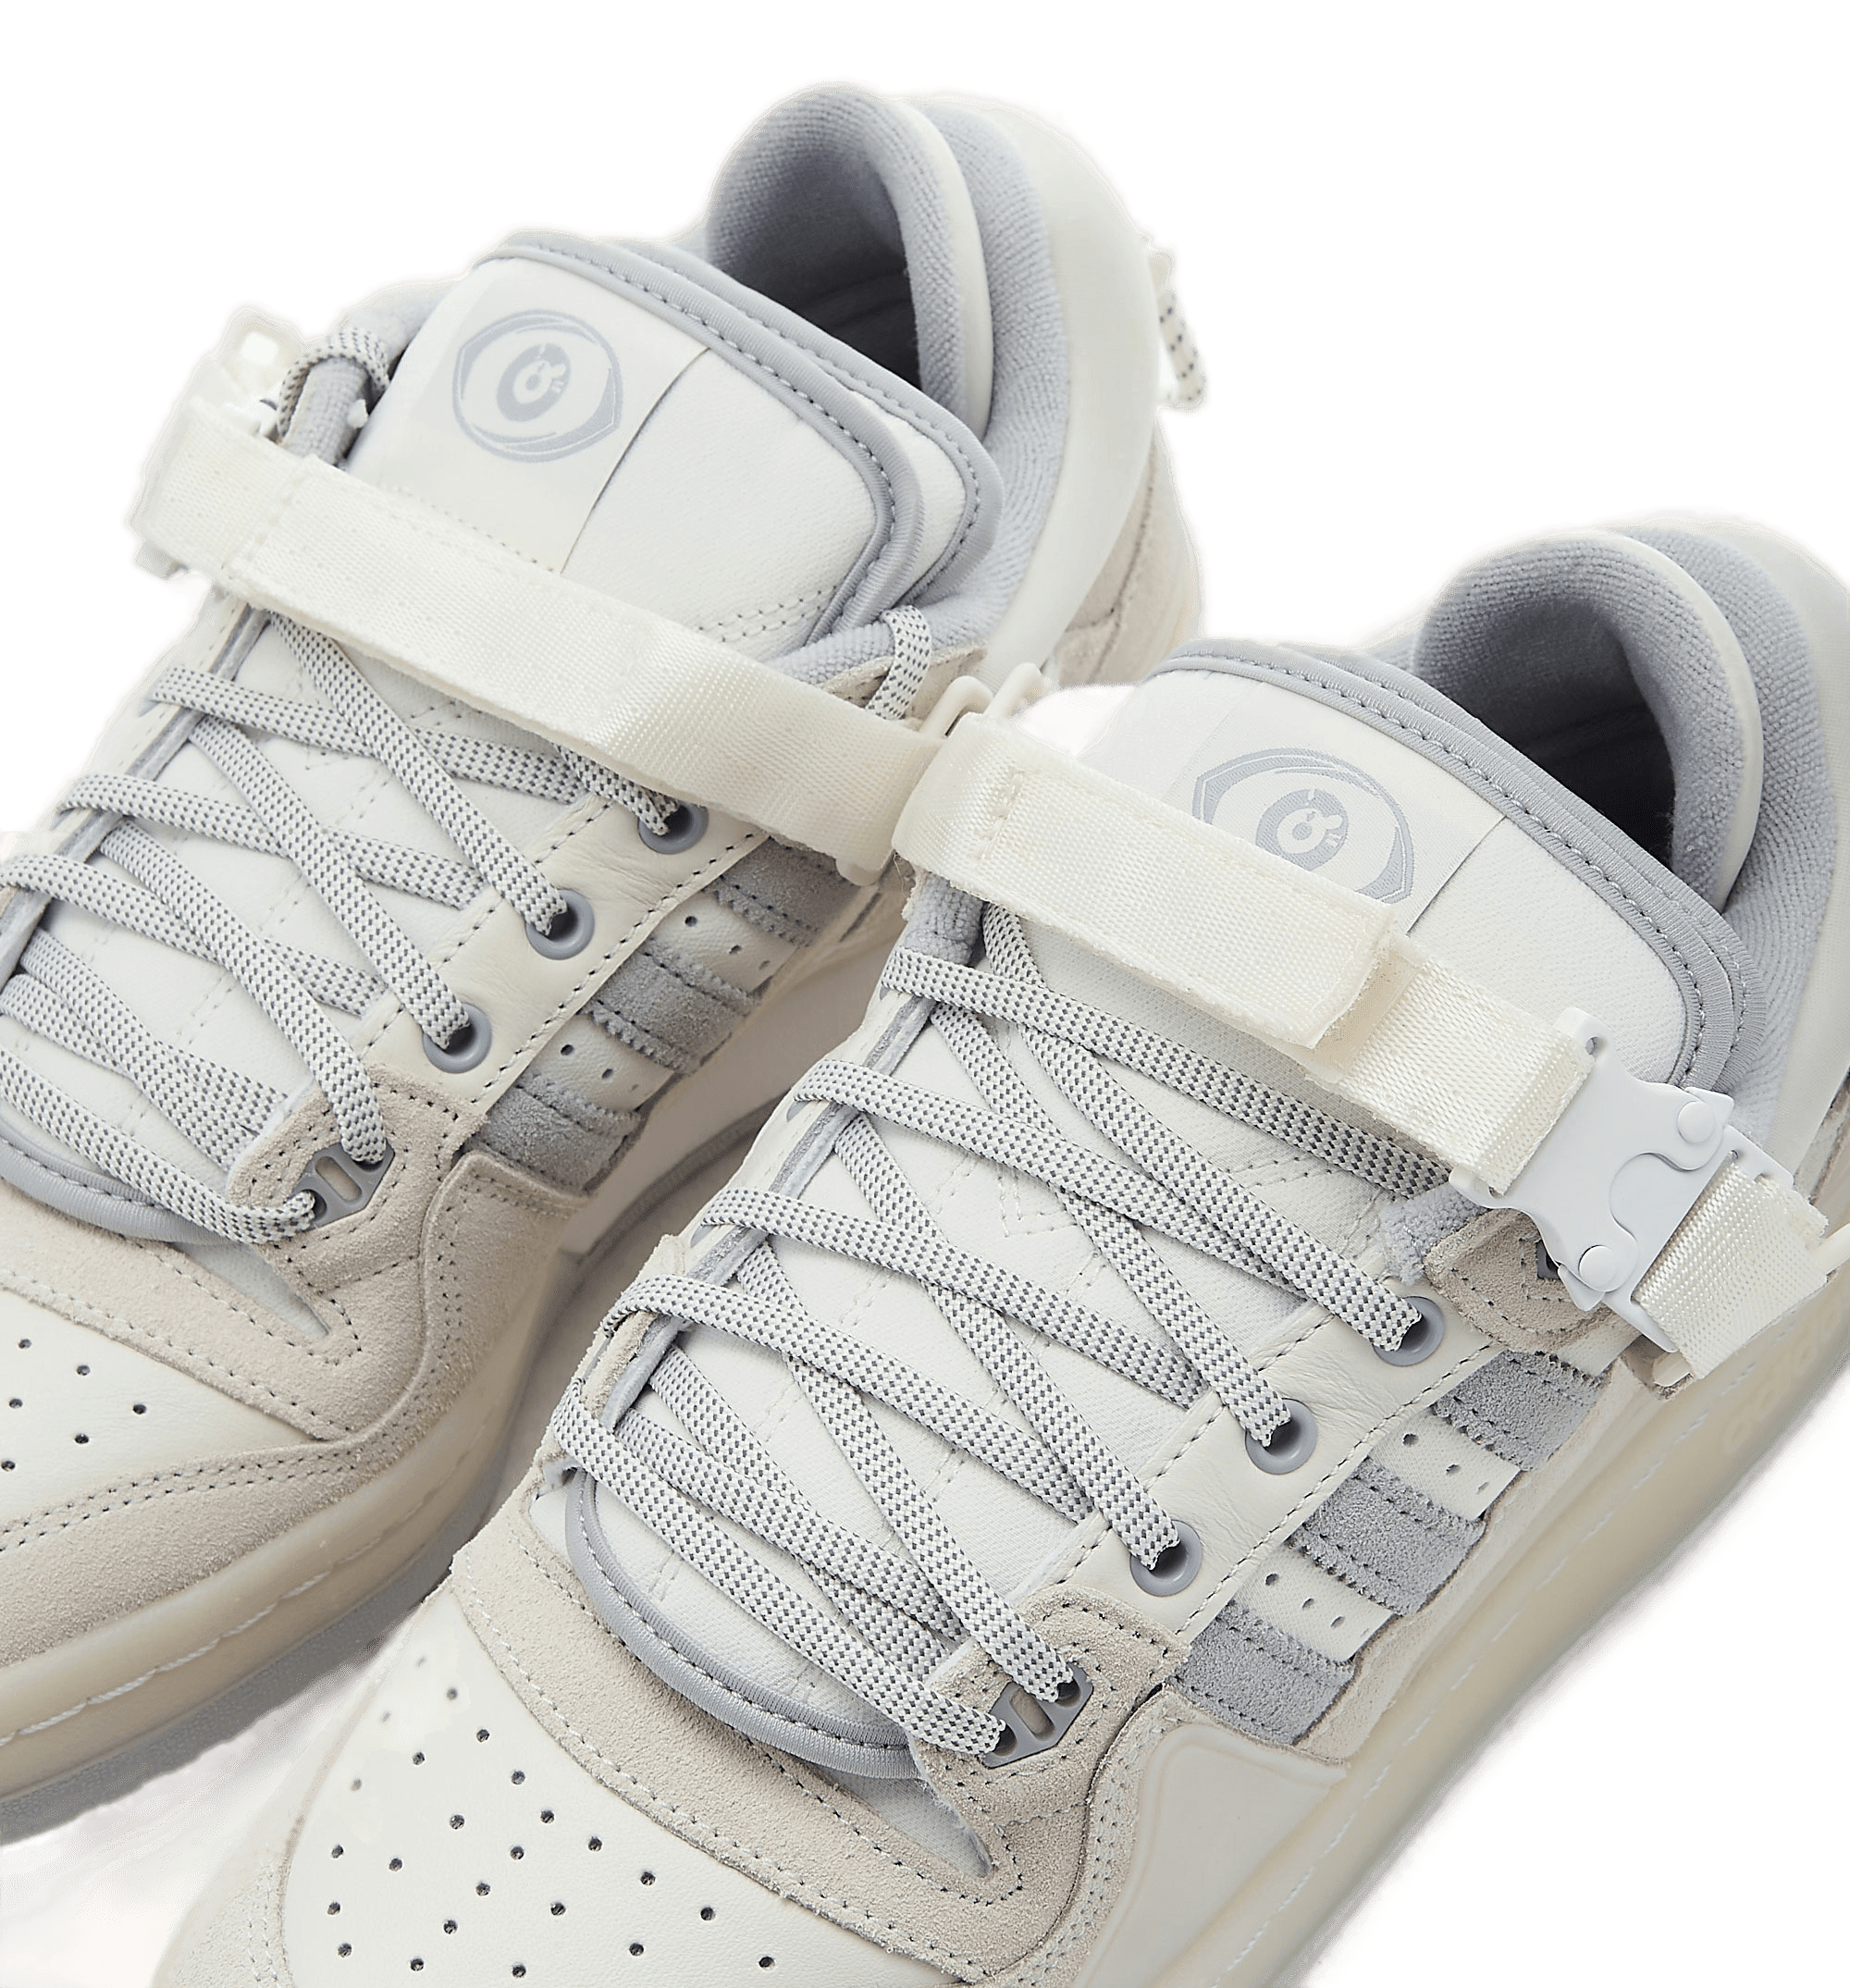 Adidas Forum Low – Bad Bunny White SneakCenter x Cloud